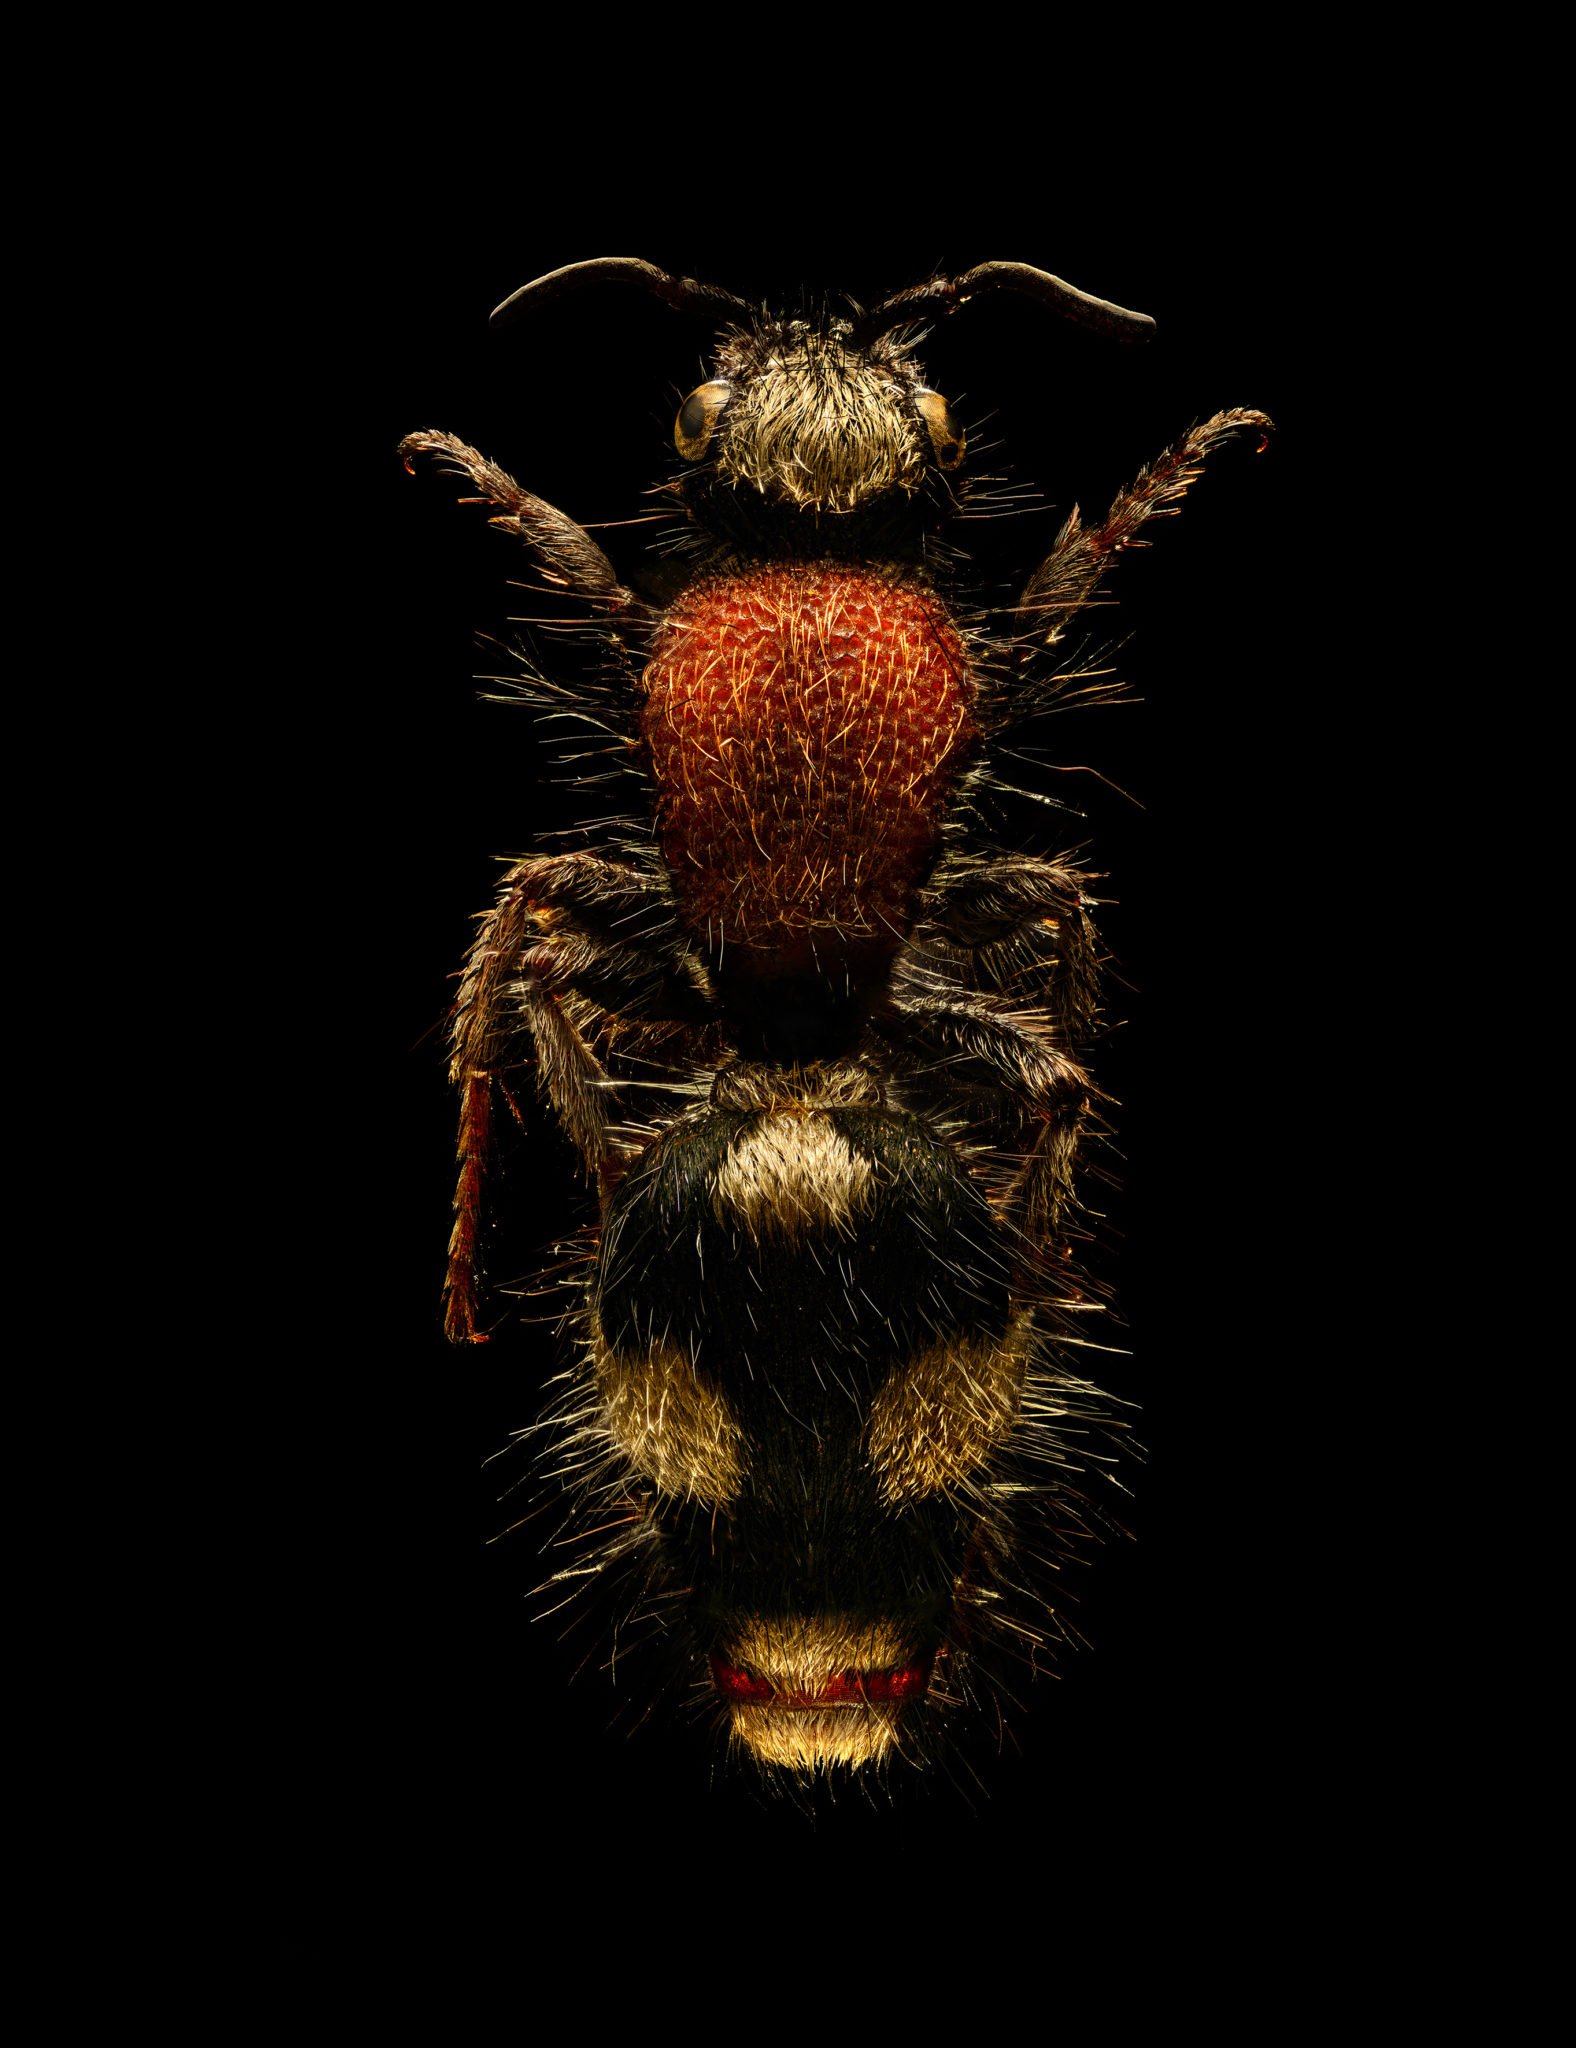 Microsculpture: Insanely Detailed Macro Photos of Bugs